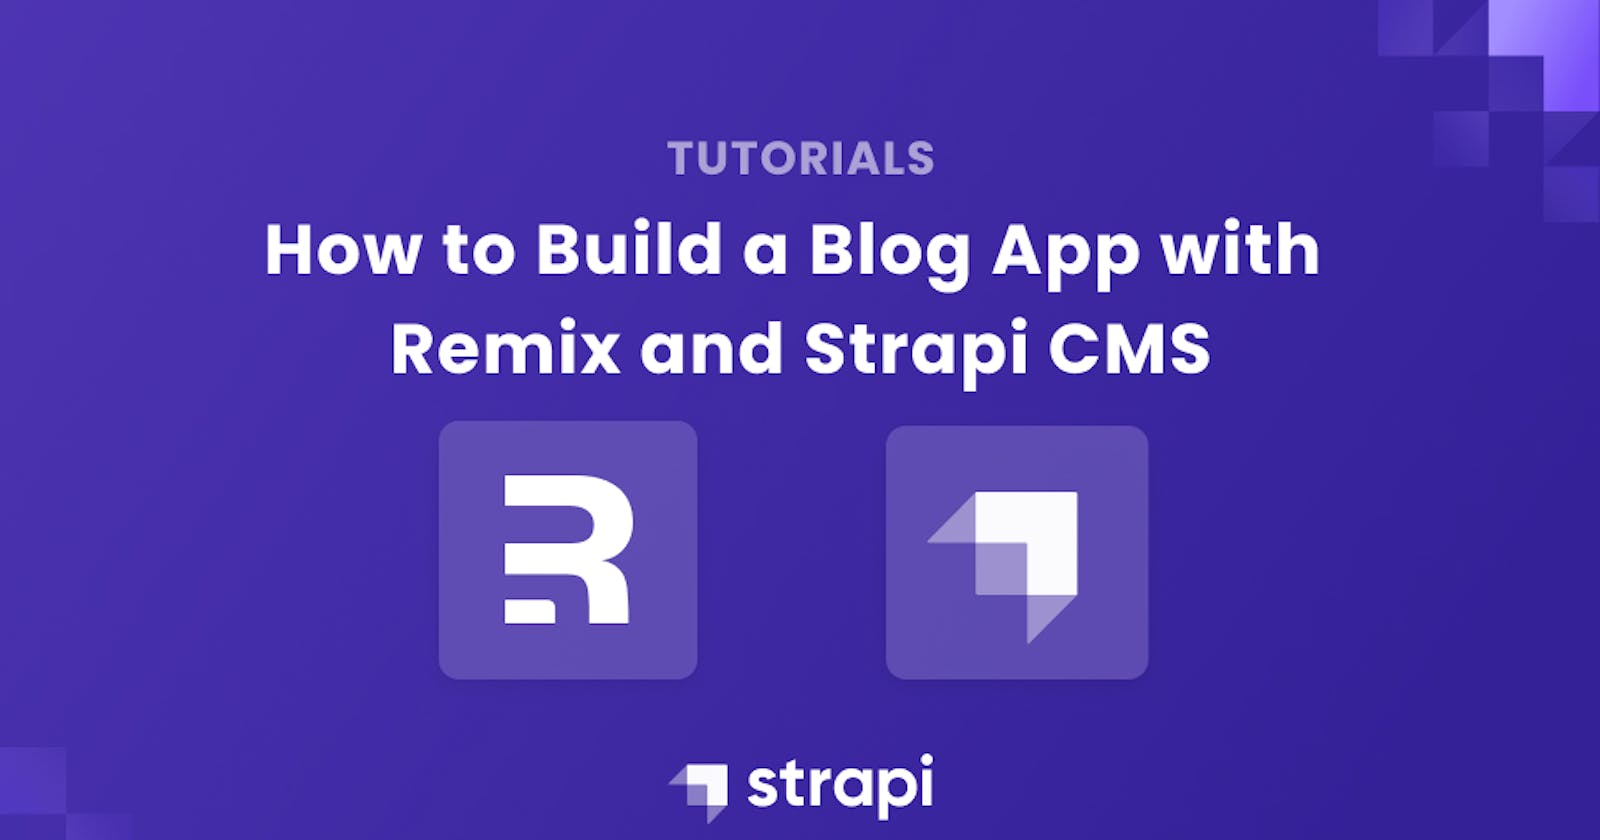 Build a Blog APP with Remix and Strapi